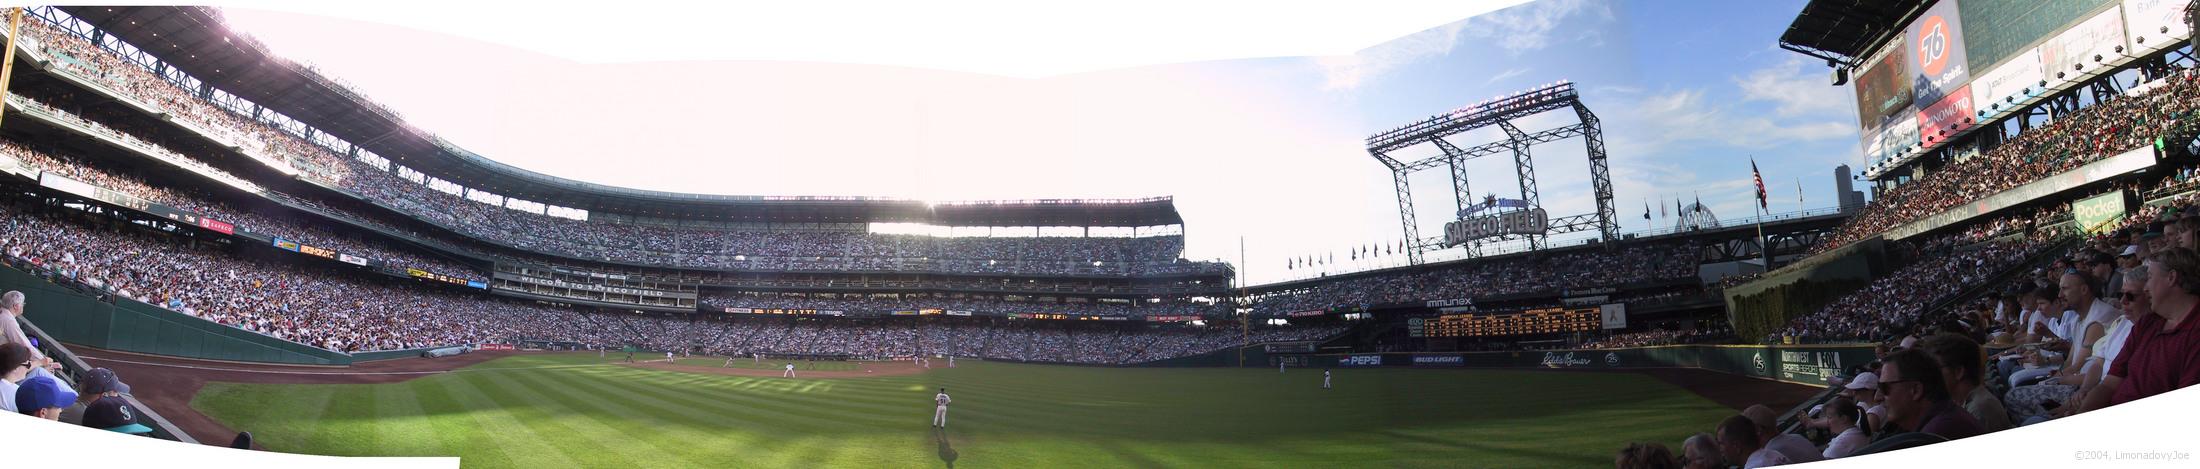 The Safeco Field